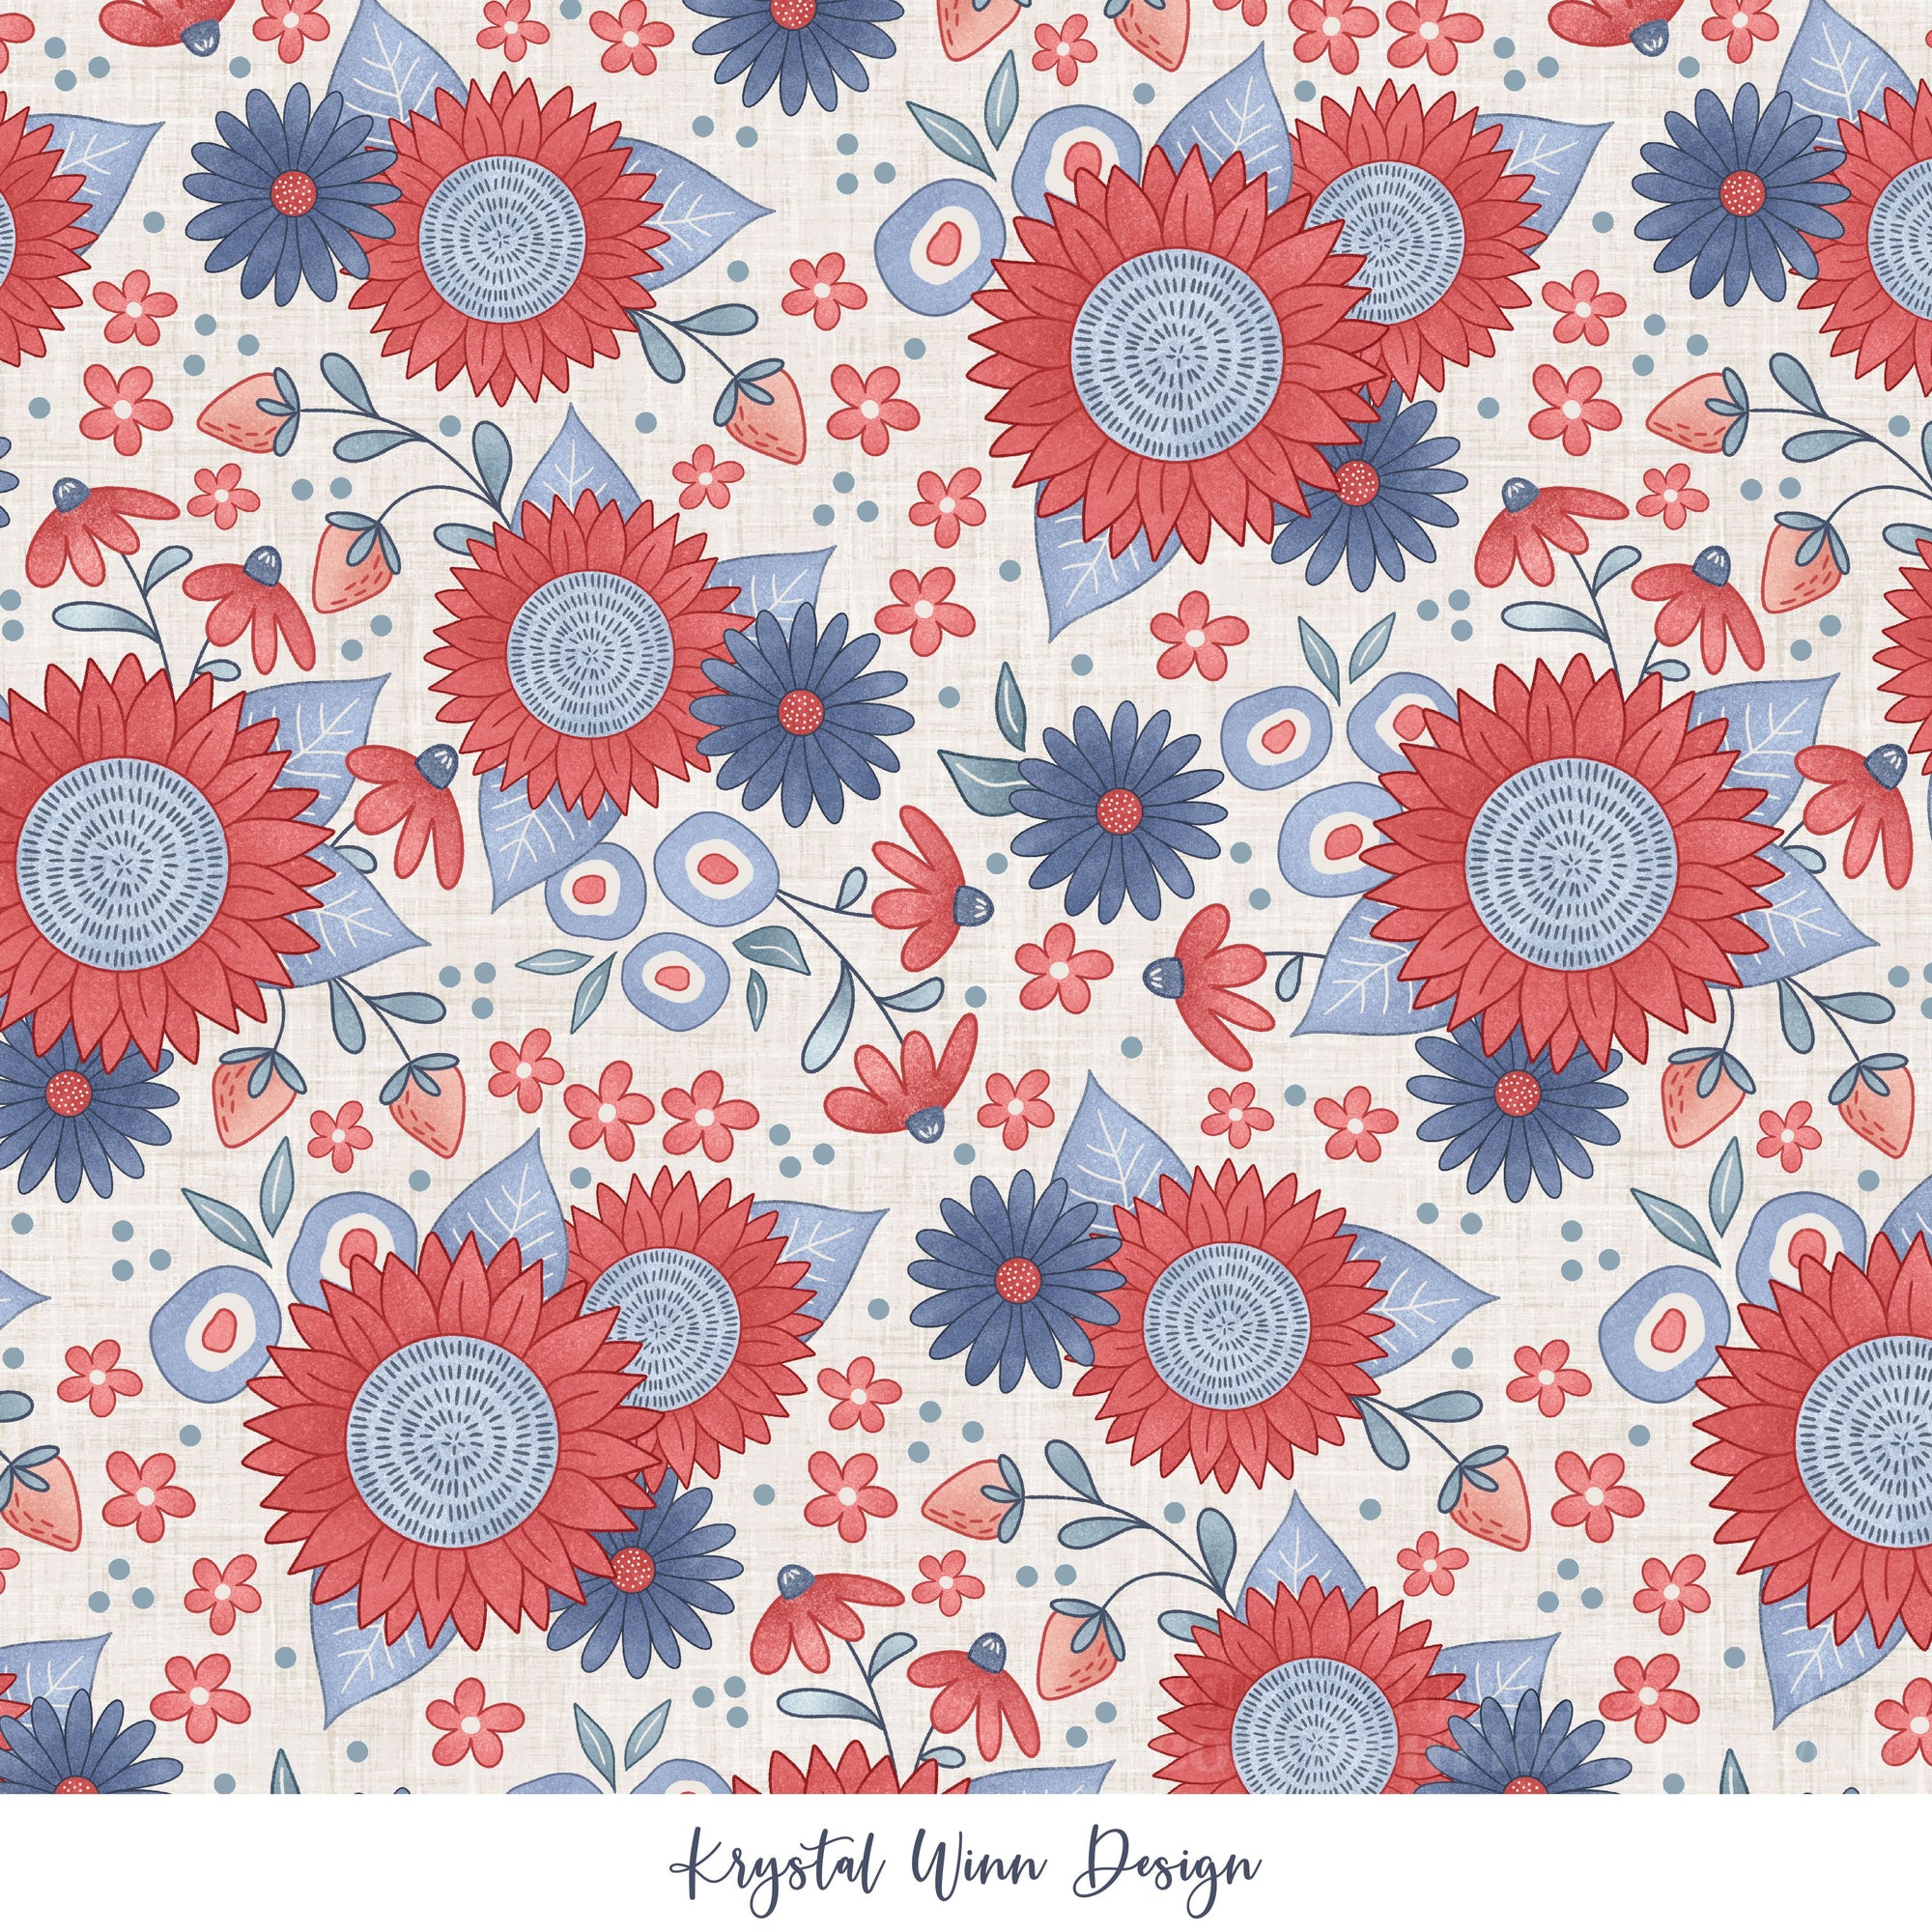 Yankee Doodle Floral White